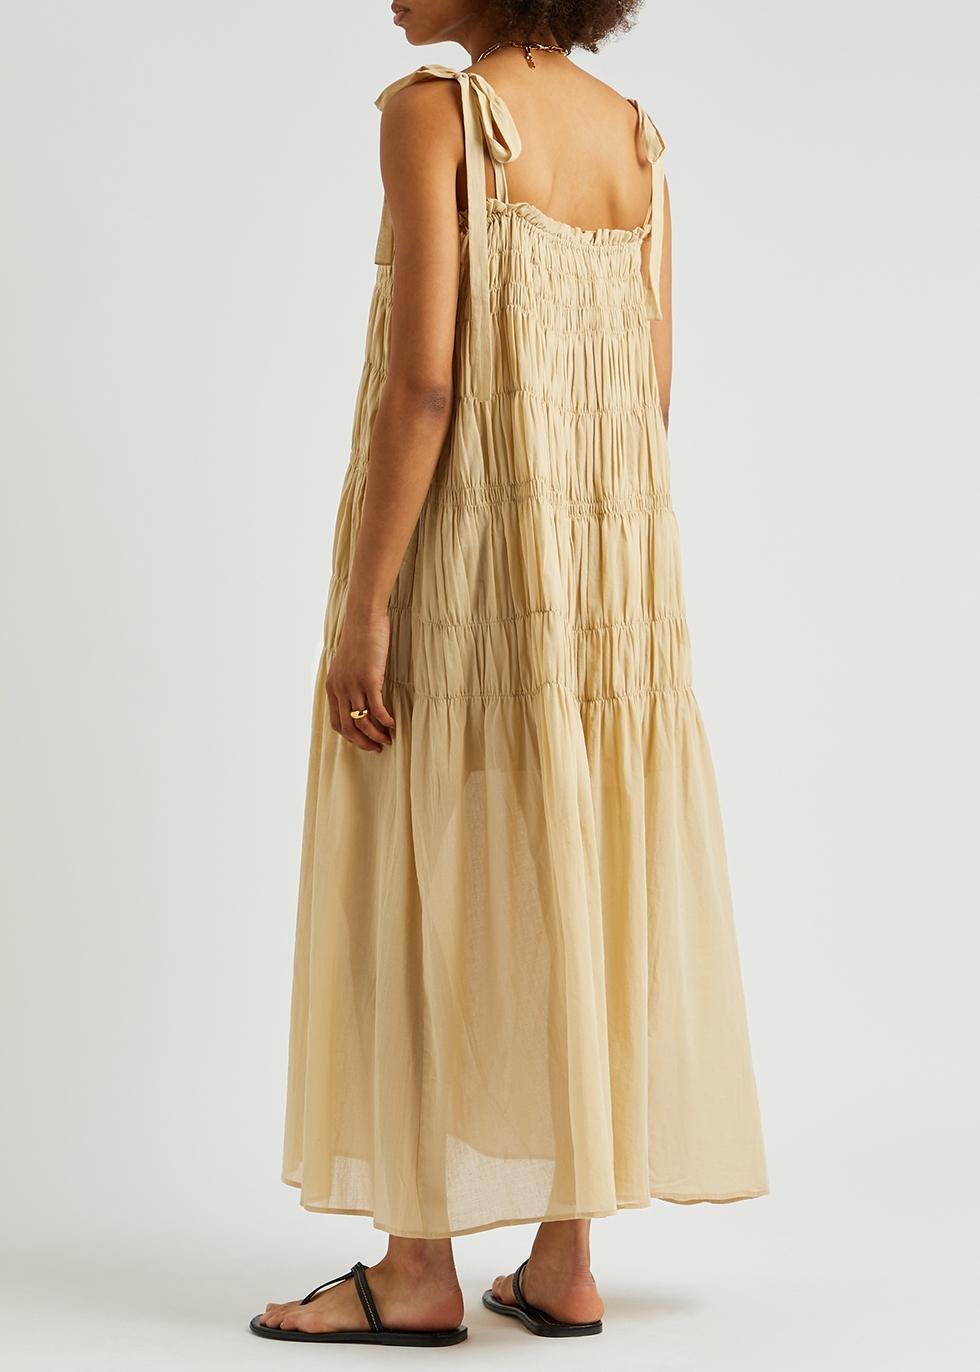 By Malene Birger Vyra Smocked Cotton Maxi Dress in Natural | Lyst